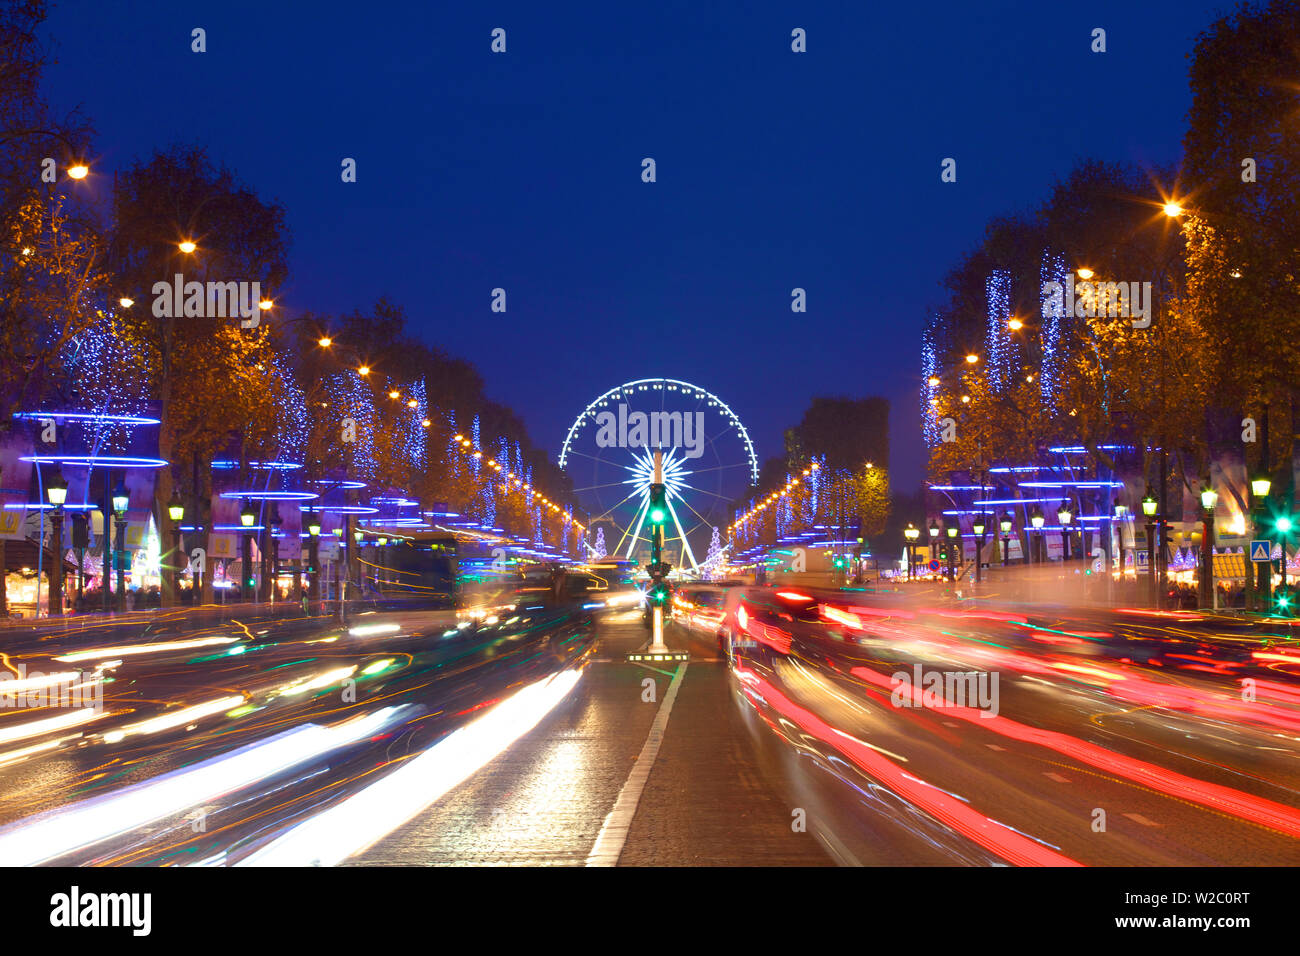 Big Wheel And Xmas Decorations, Avenue des Champs-Elysees,  Paris, France, Western Europe. Stock Photo